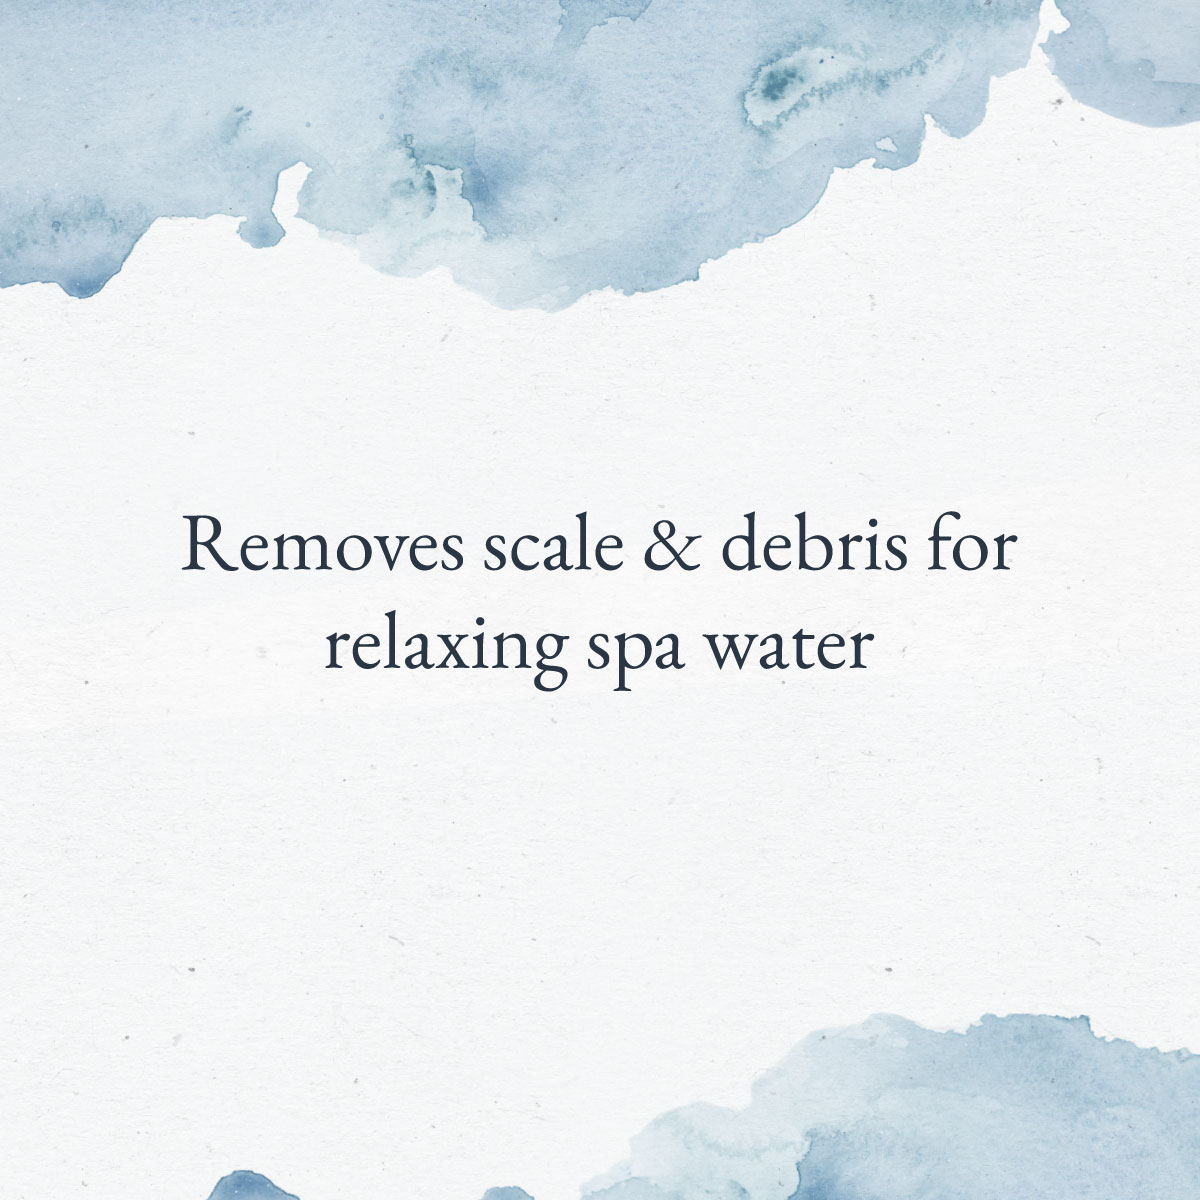 Removes scale & debris for relaxing spa water